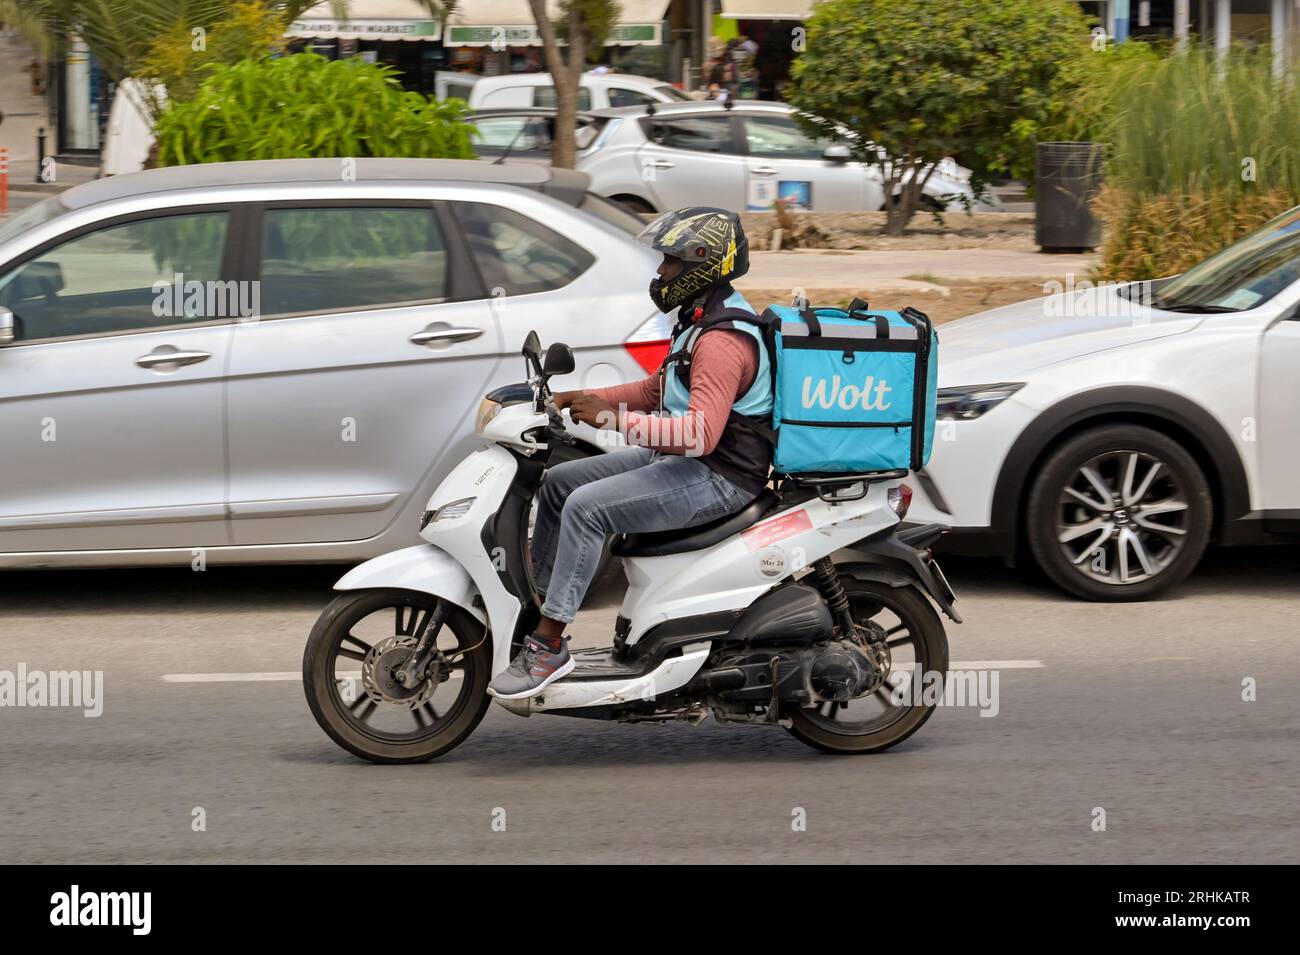 Sliema, Malta - 6 August 2023: Person riding a motor scooter with an Insulated container for the Wolt food takeway delivery service on the back Stock Photo